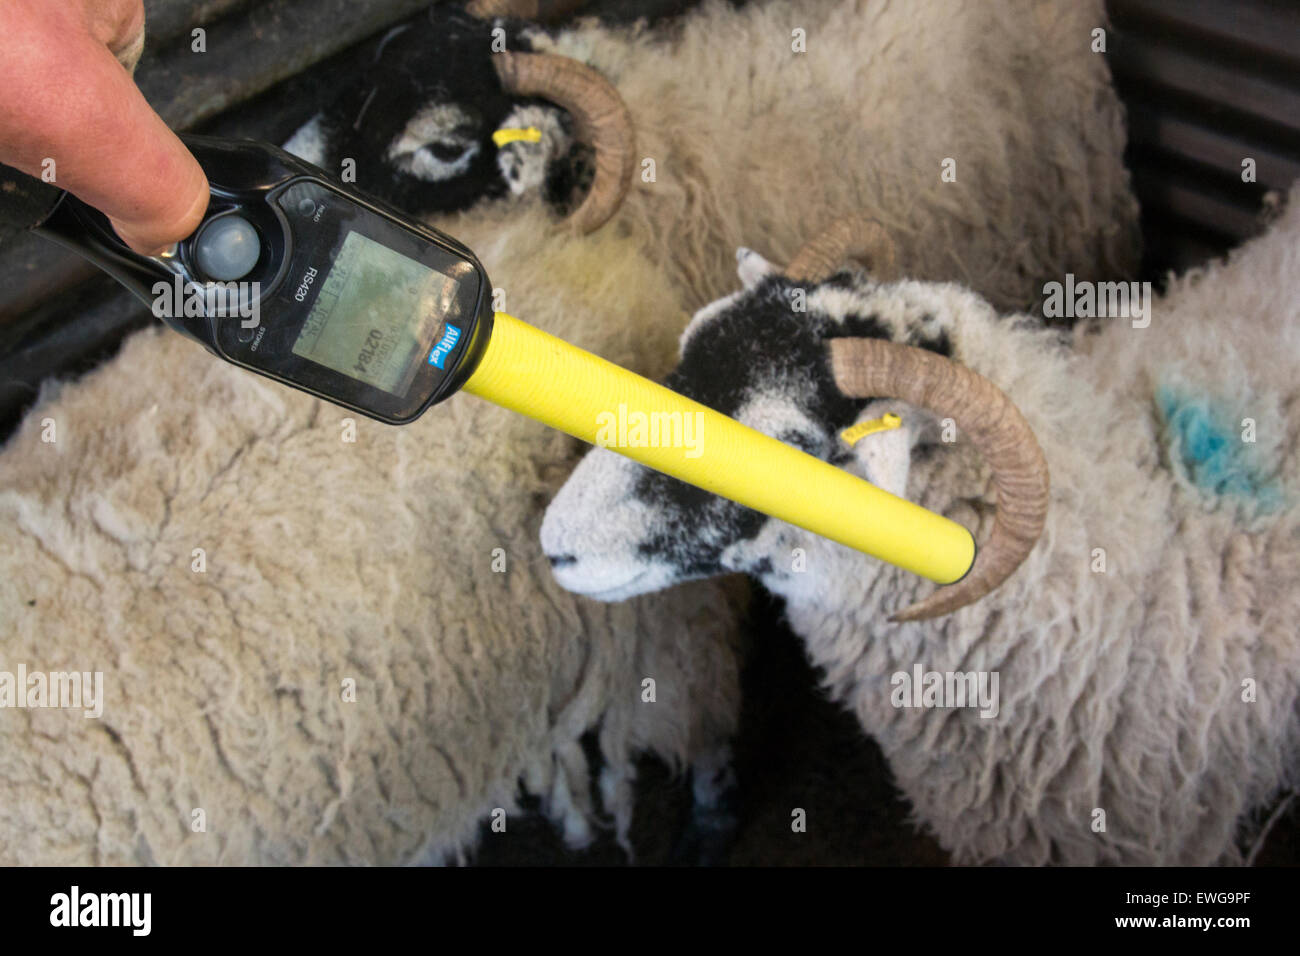 Electronic Identification device (EID) tag reader being used on sheep, reading tags. Stock Photo